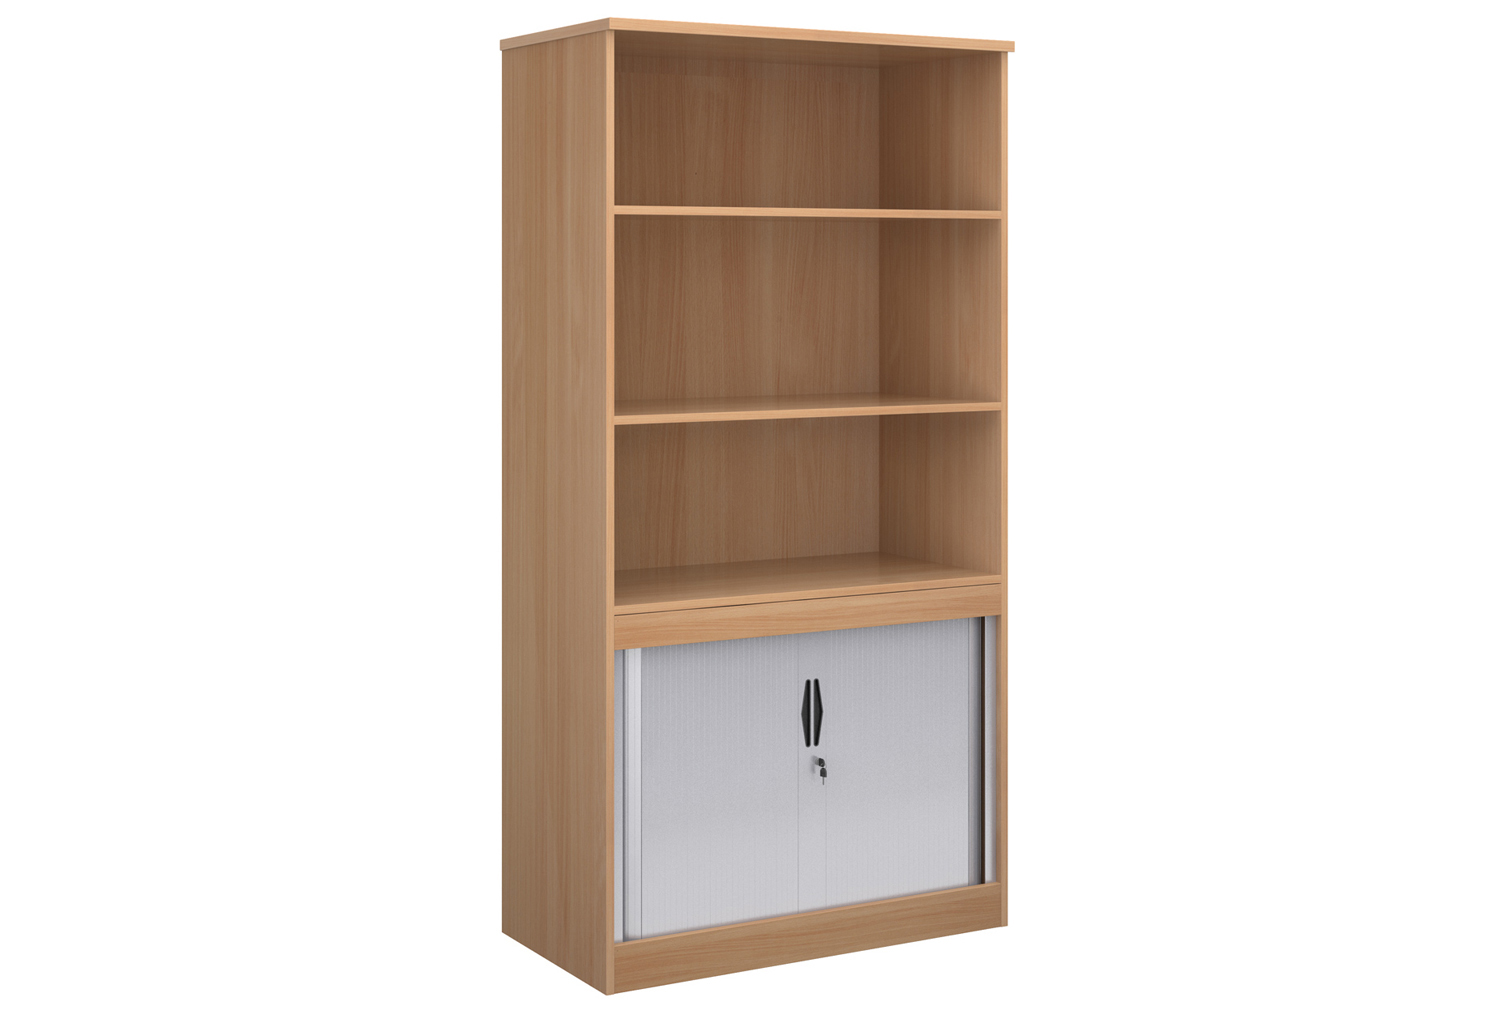 Multi Storage Open Top Tambour Office Cupboards, 3 Shelf - 102wx55dx200h (cm), Beech, Fully Installed